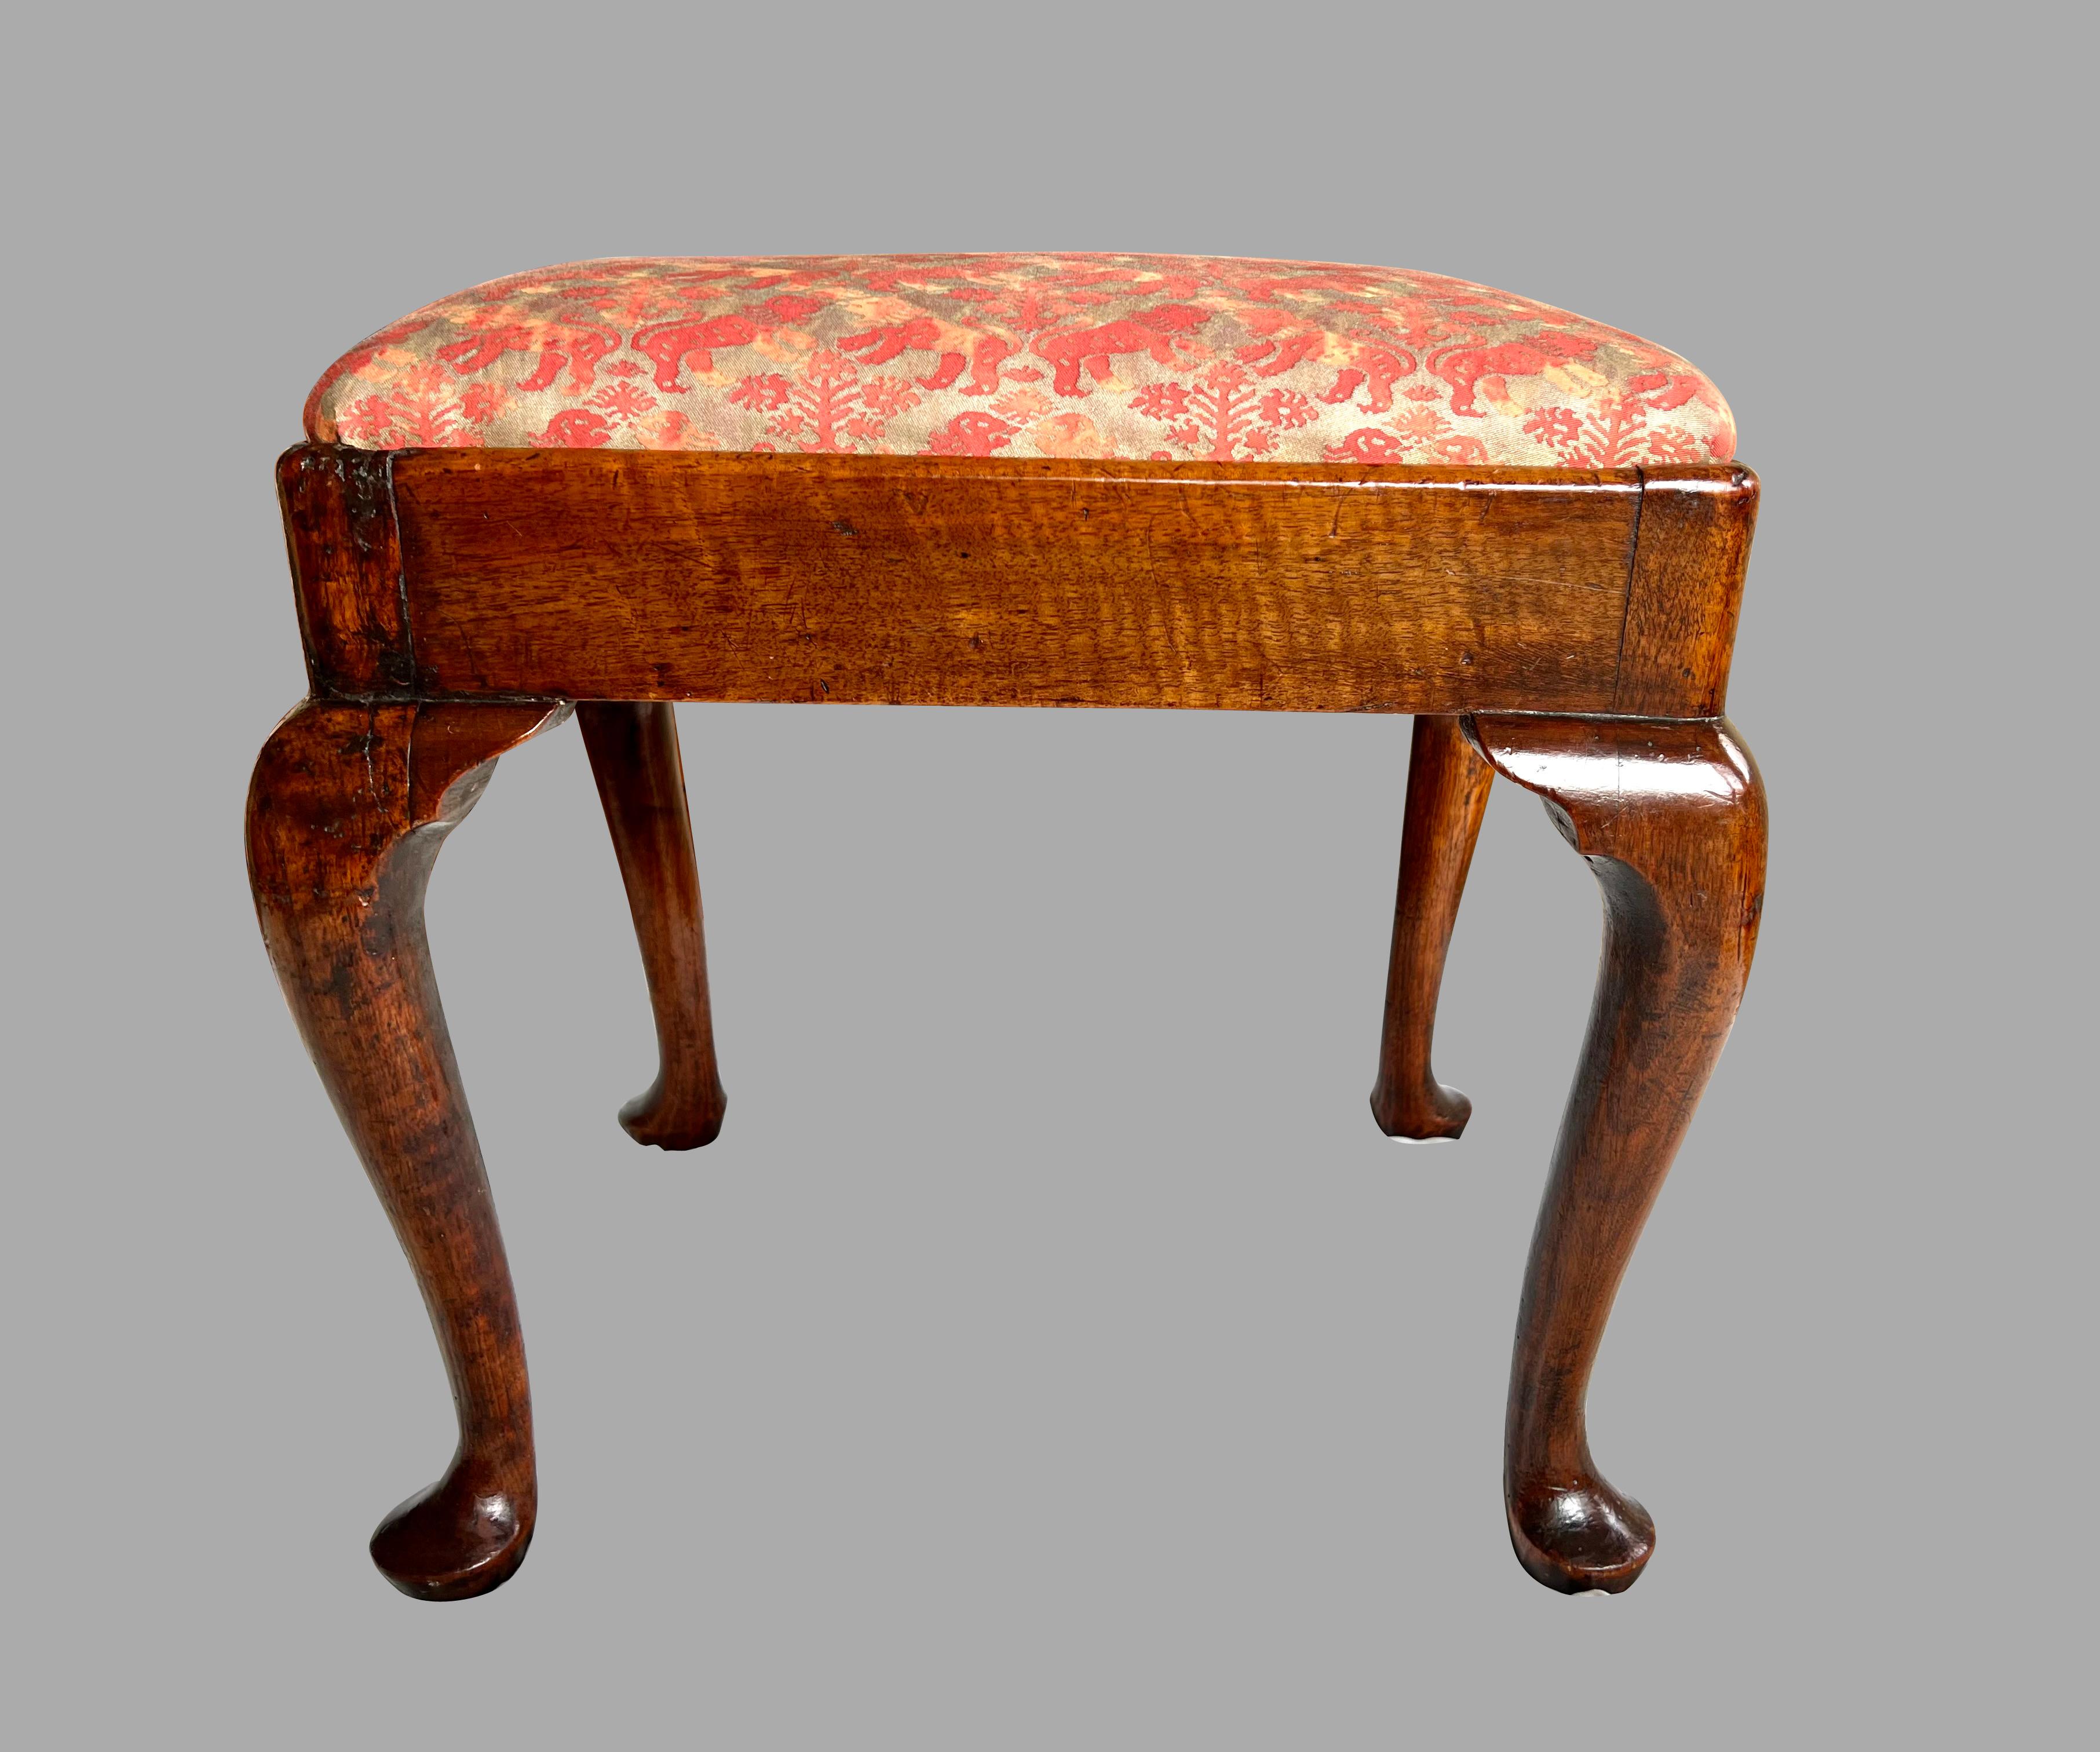 An elegant English George I period mahogany small bench or stool, the cushion inset in a rectangular frame, now upholstered in Fortuny silk, resting on cabriole legs ending in pad feet. Attractive warm nutty brown color. Circa 1730-1750. Old repairs.